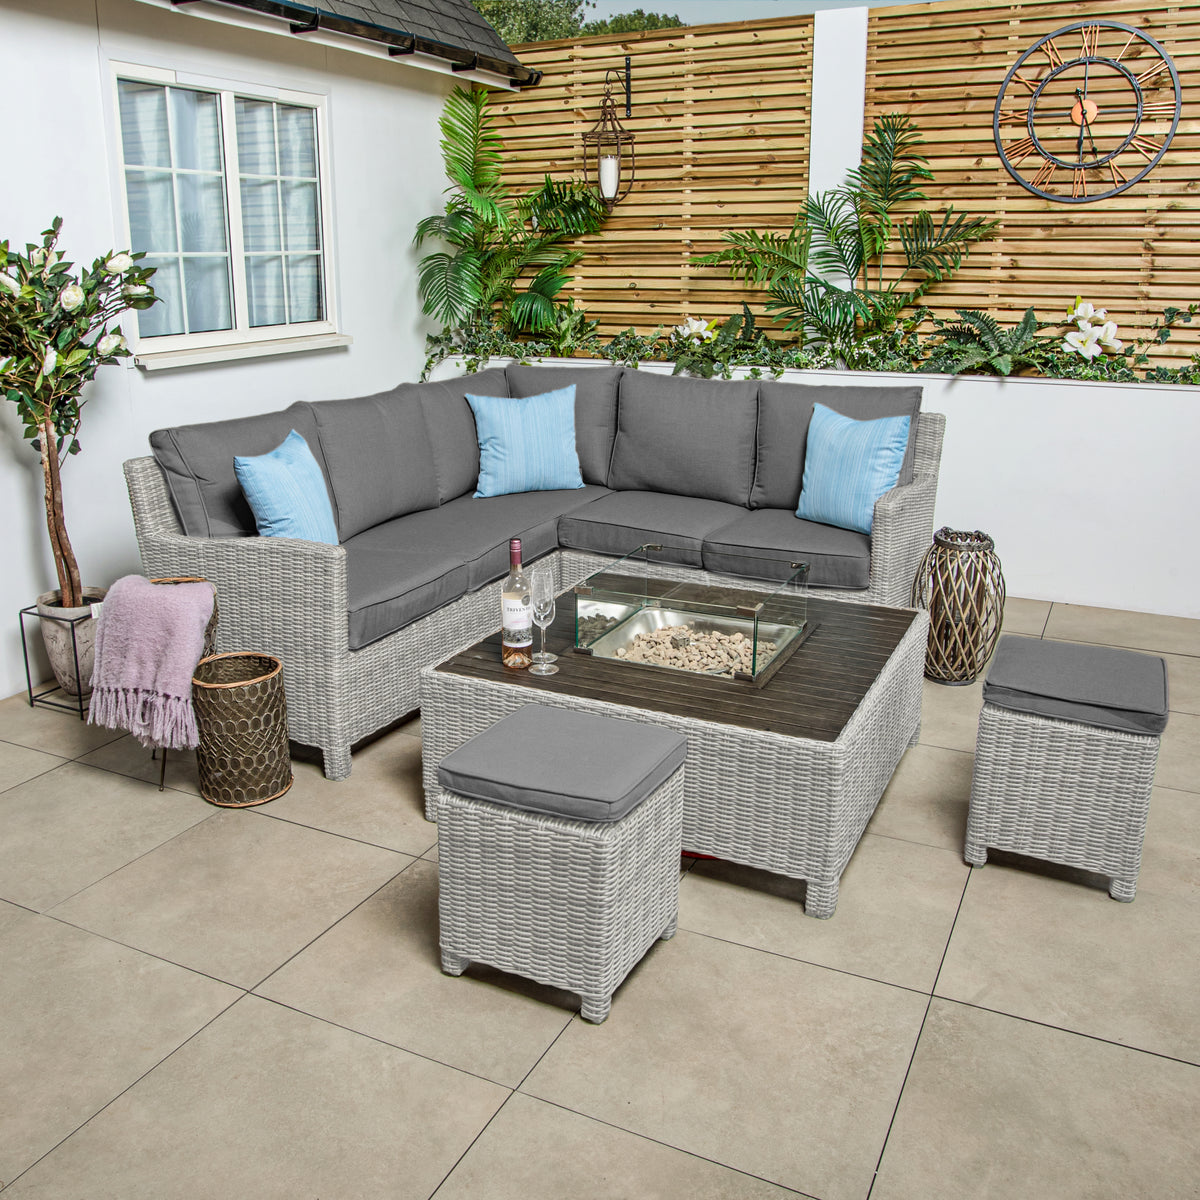 Kettler Palma Mini Corner Whitewash Wicker Outdoor Sofa Set with Low Fire Pit Table